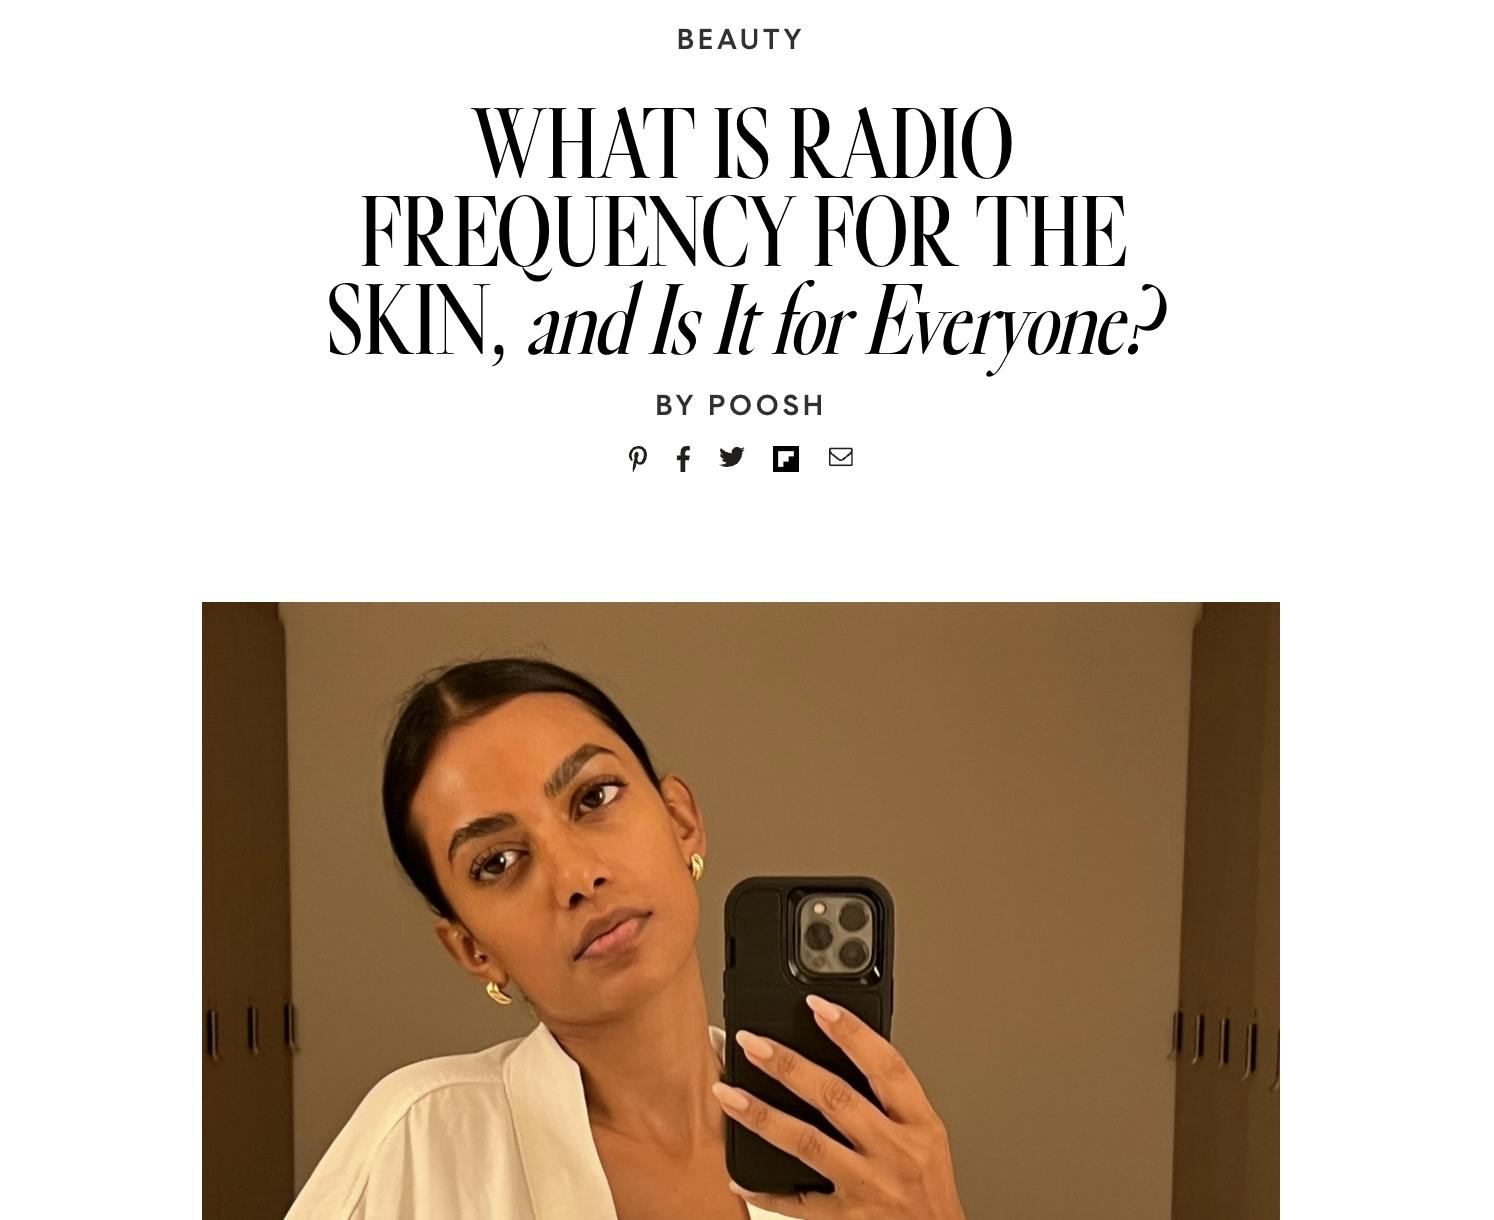 What is Radio Frequency for the Skin, is it for Everyone?